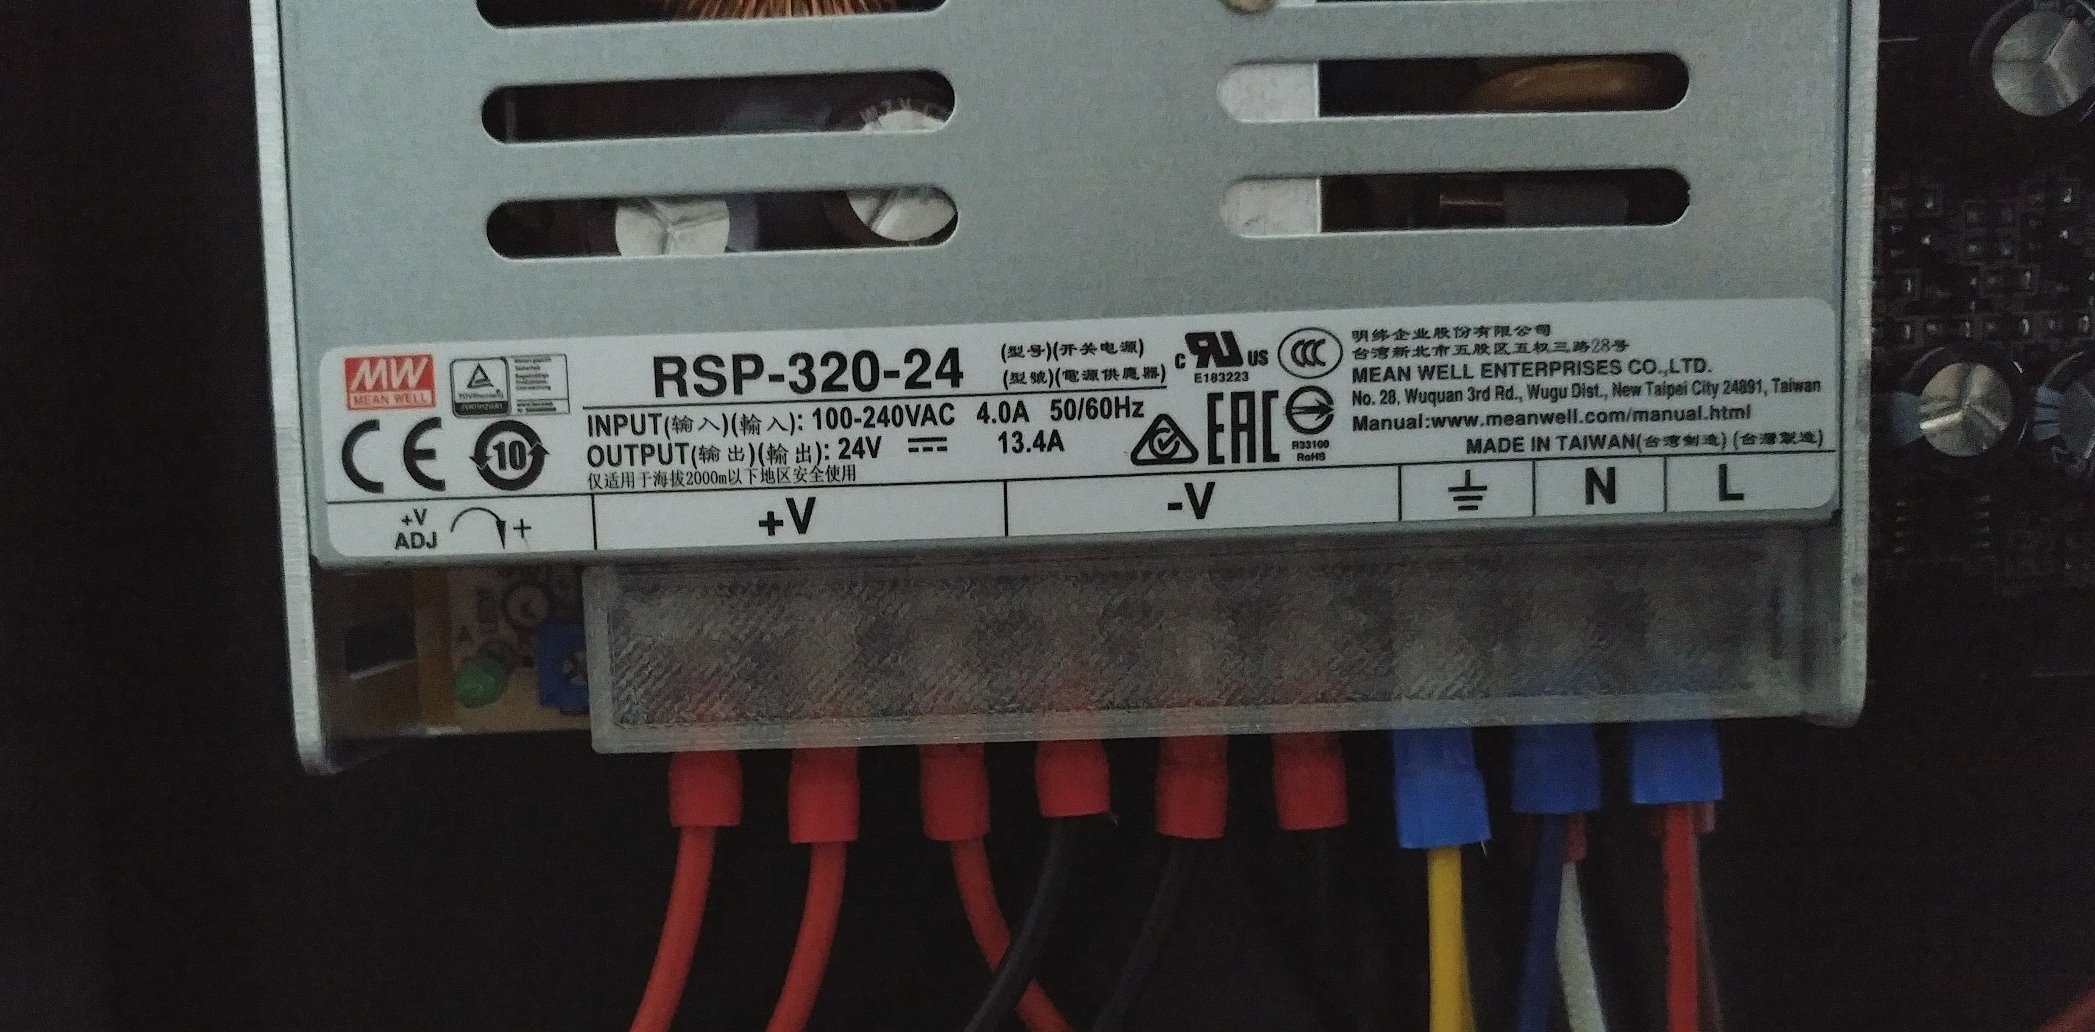 small cover for Meanwell RSP-320 power supply terminals